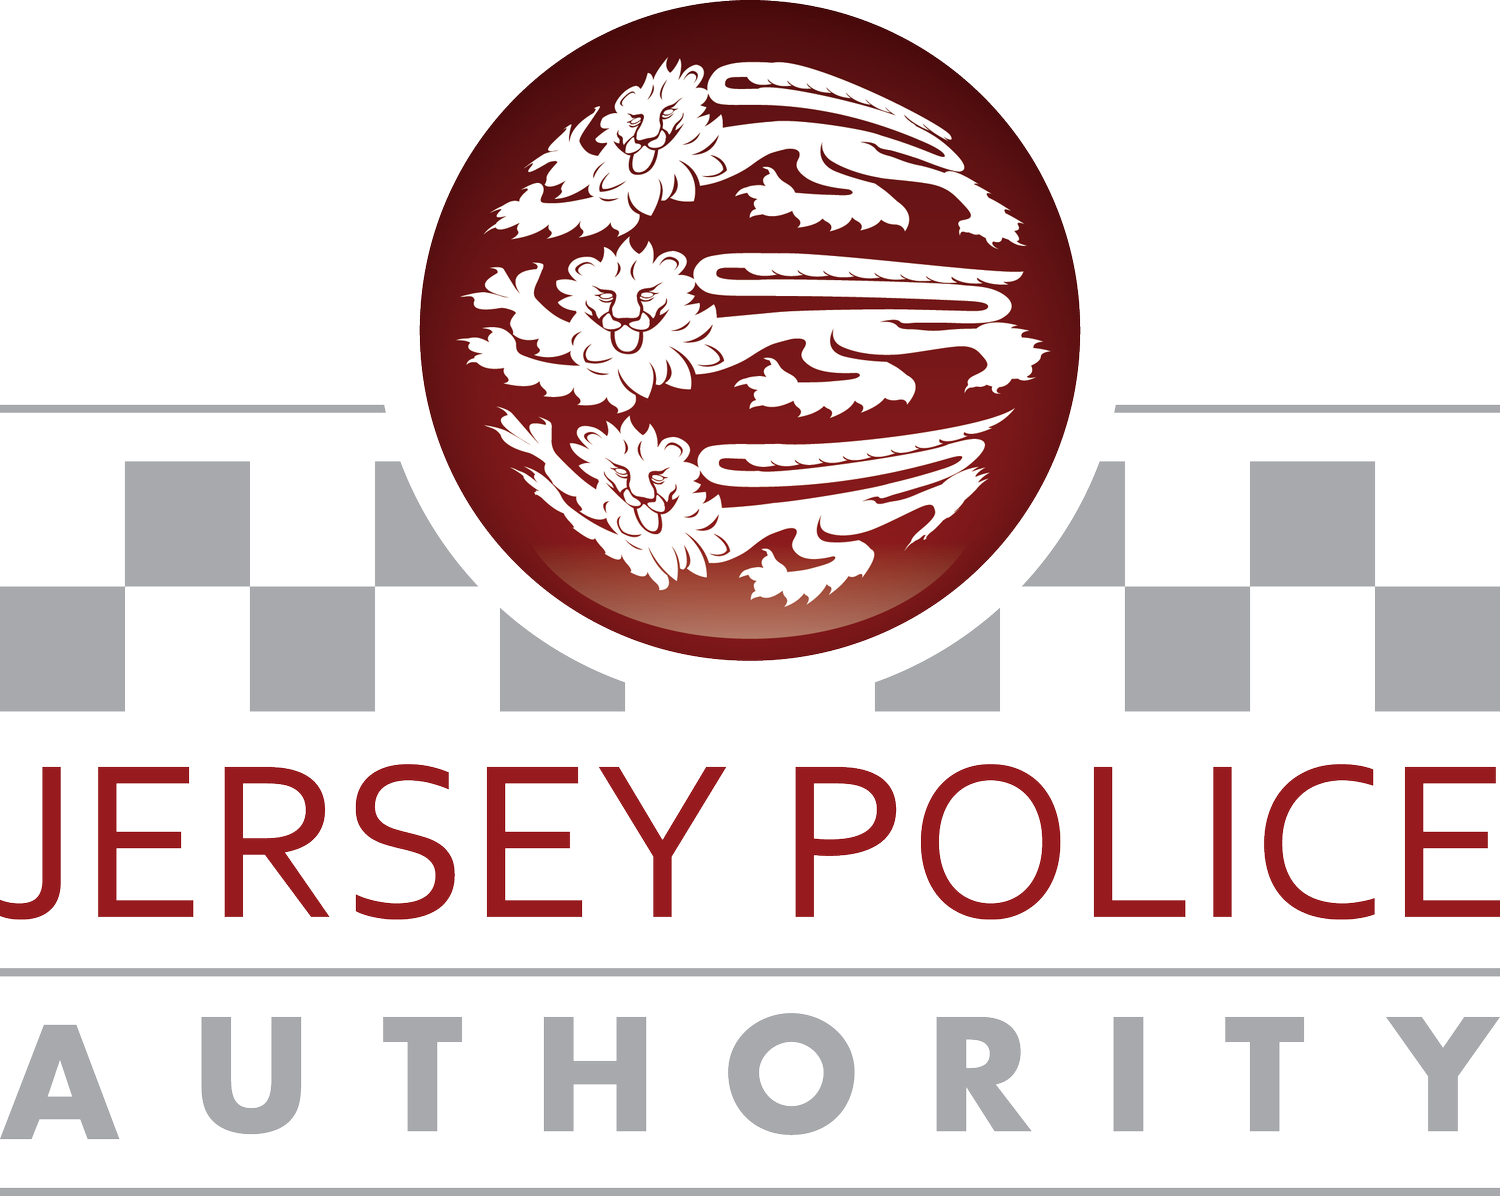 Jersey Police Authority